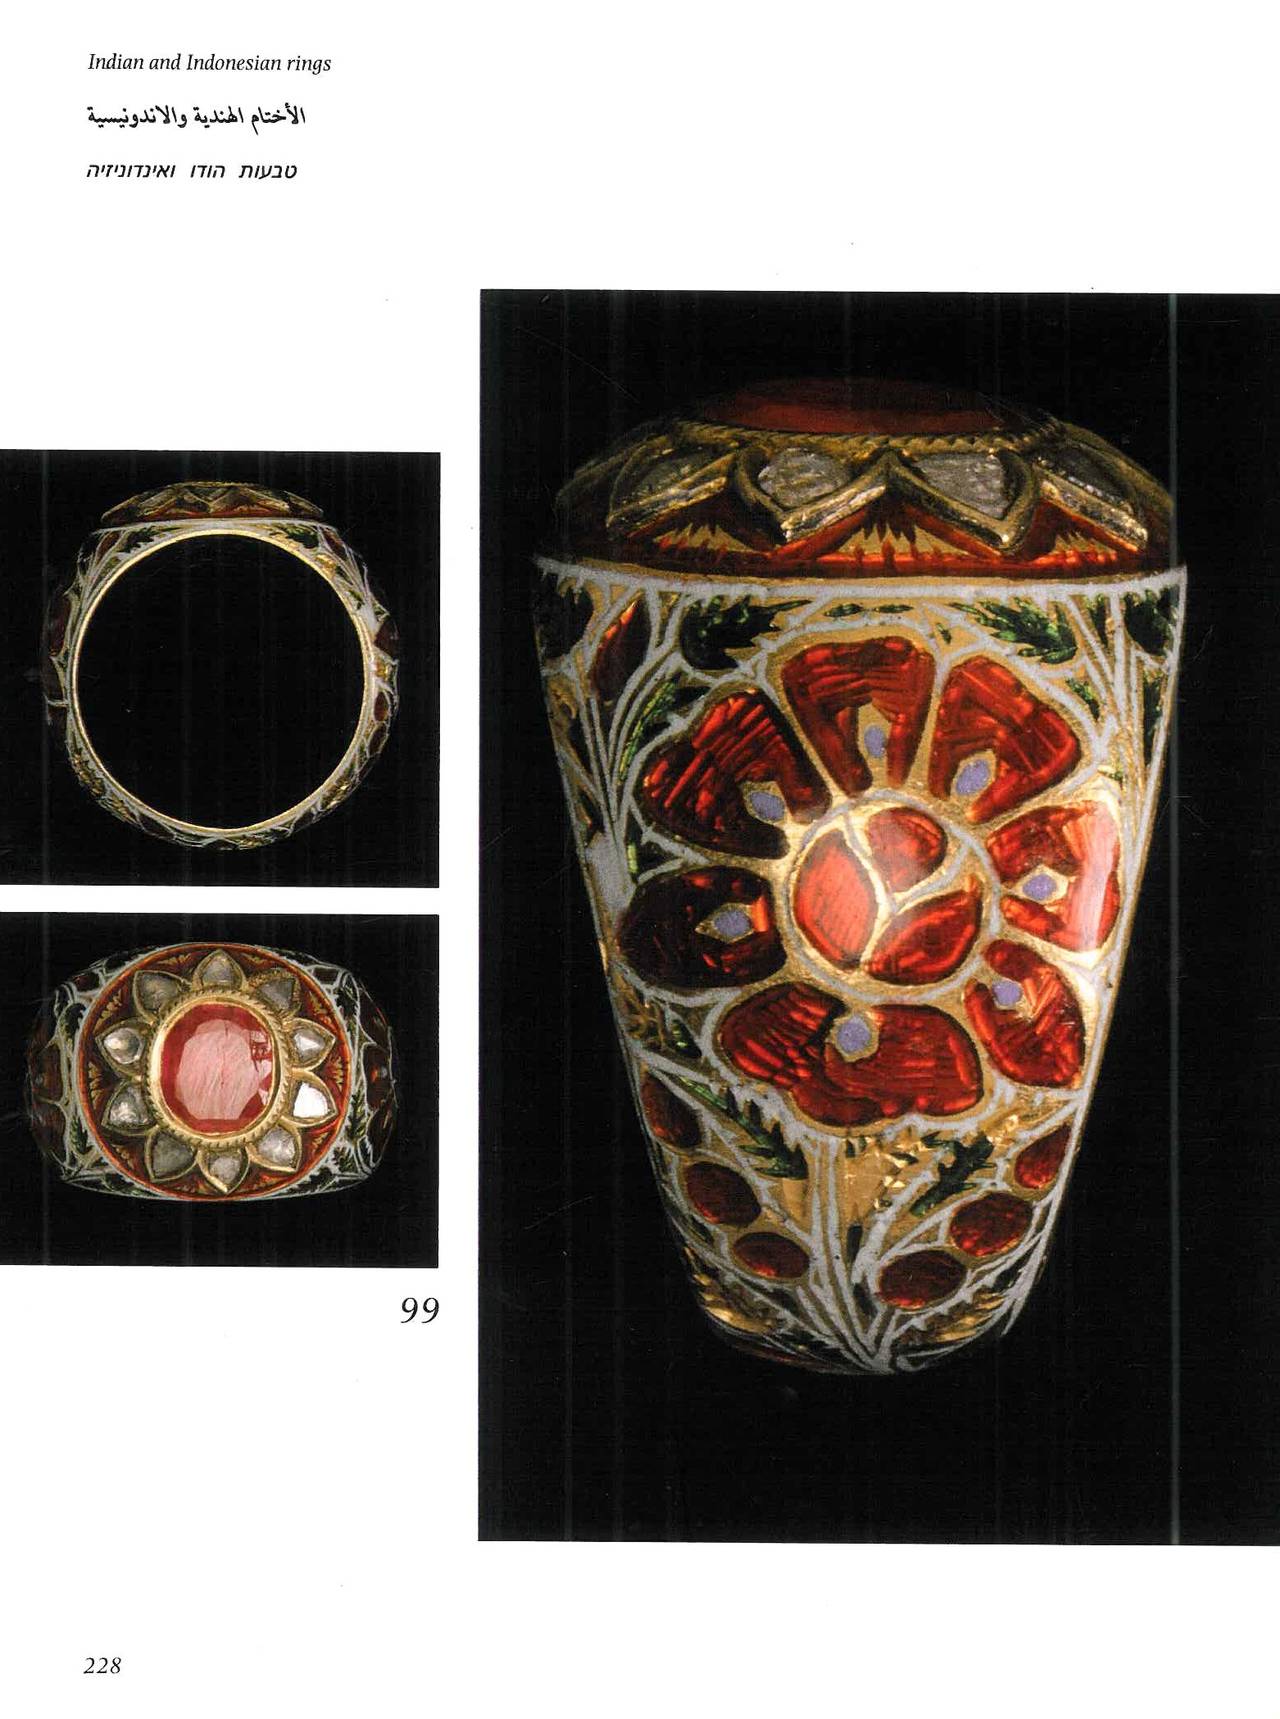 Book of Islamic Rings & Gems - The Zucker Collection 2